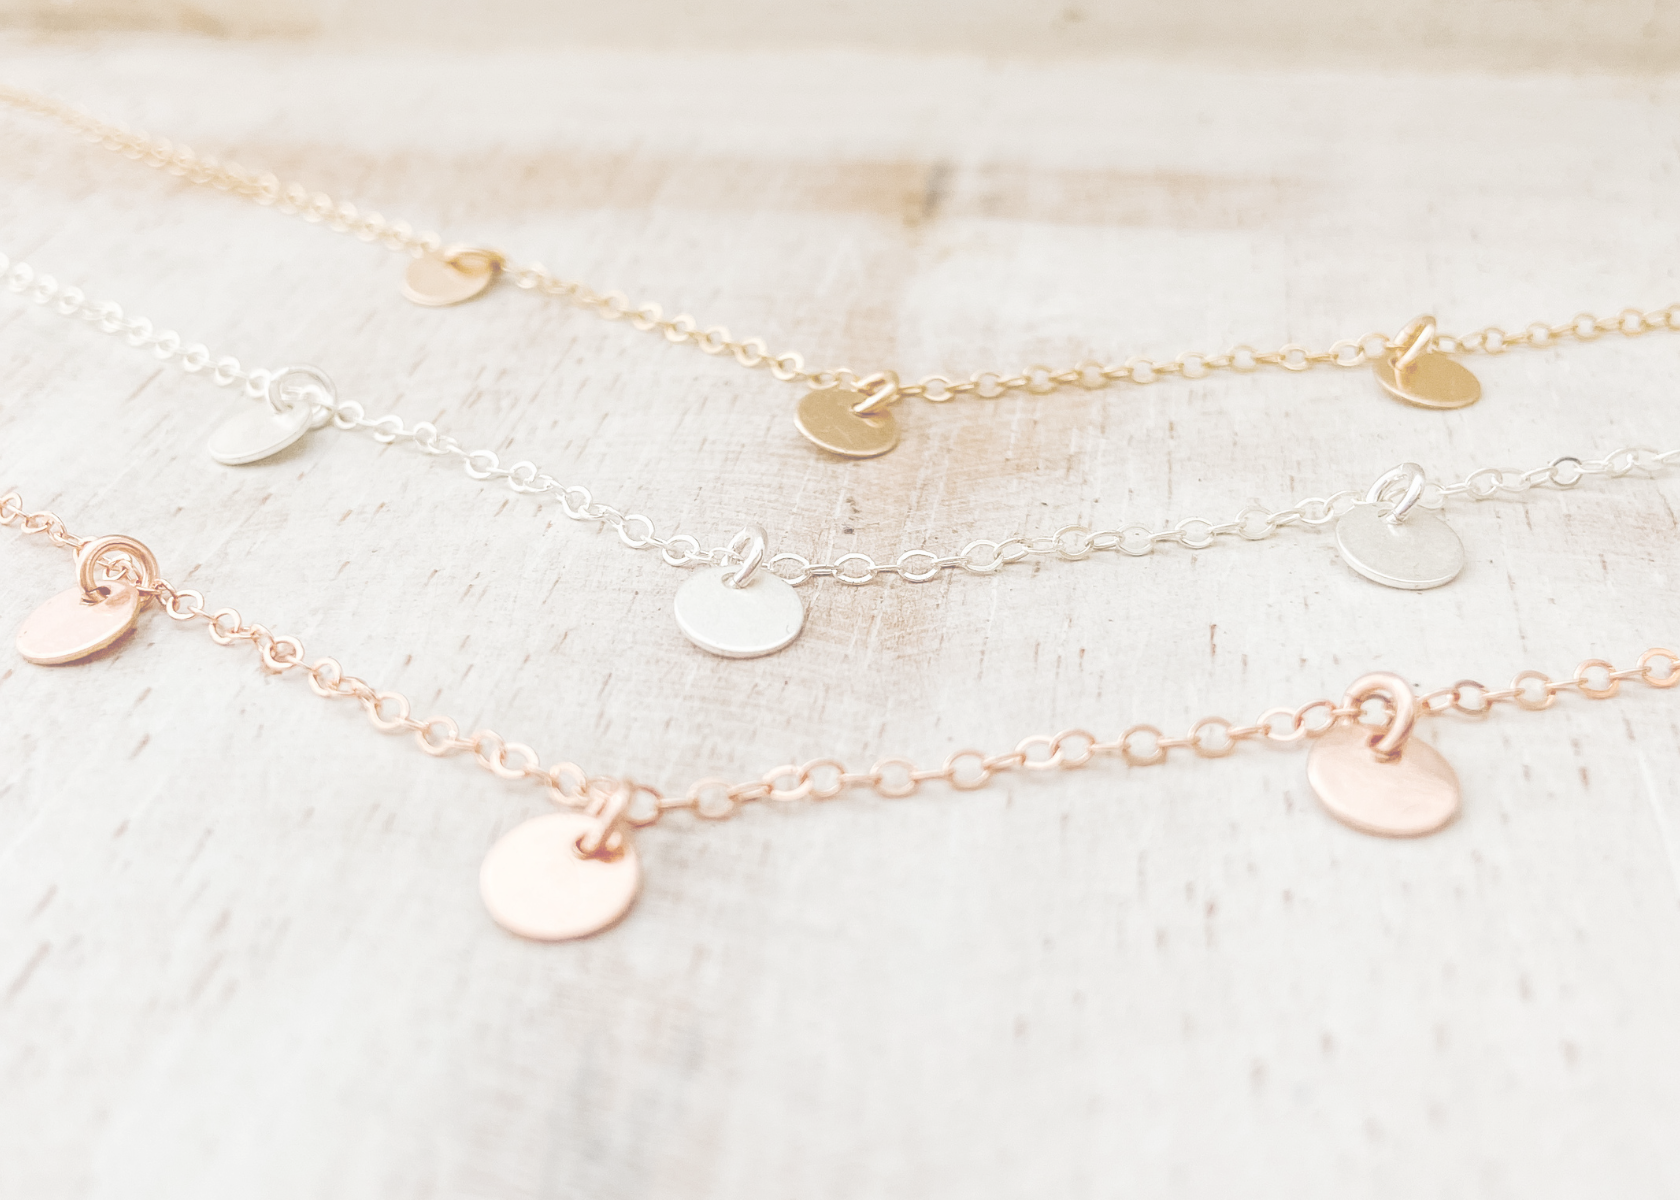 5 Gift Ideas for Your Bridesmaids